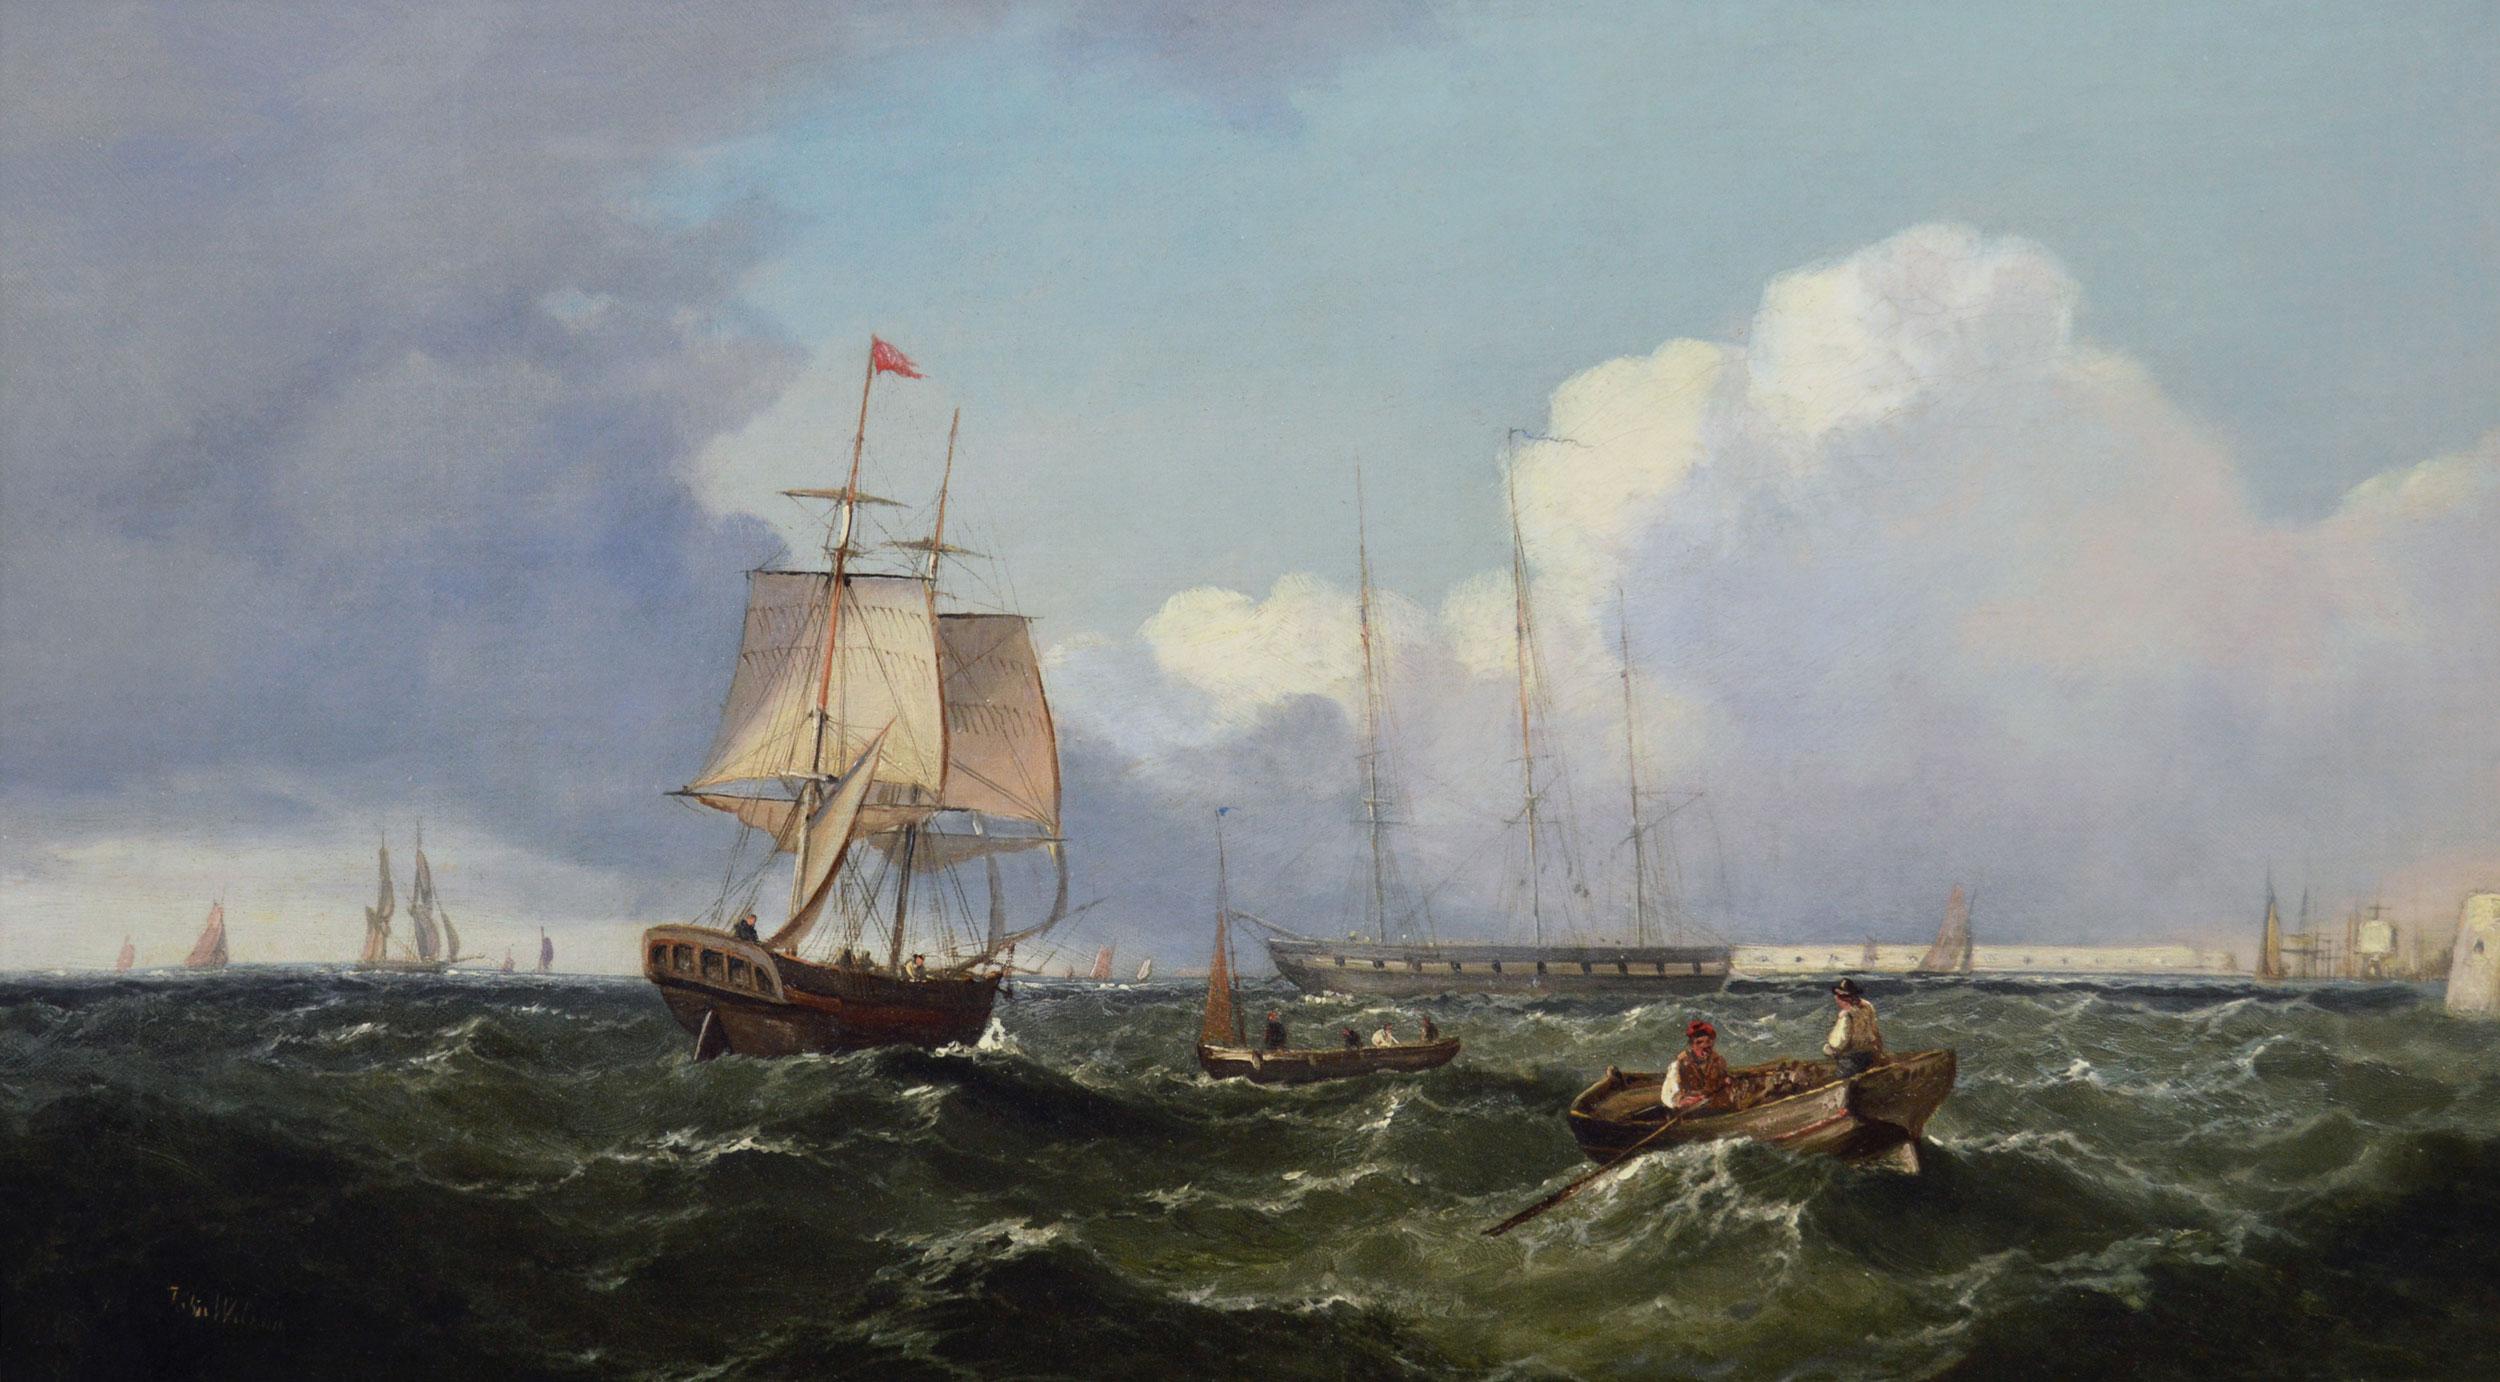 **PLEASE NOTE: EACH PAINTING INCLUDING THE FRAME MEASURES 18.5 INCHES X 26.5 INCHES**

John James Wilson 
British, (1818-1875)
Shipping off Scarborough & Shipping off Portsmouth Harbour
Oil on canvas, pair, both signed
Image size: 11.25 inches x